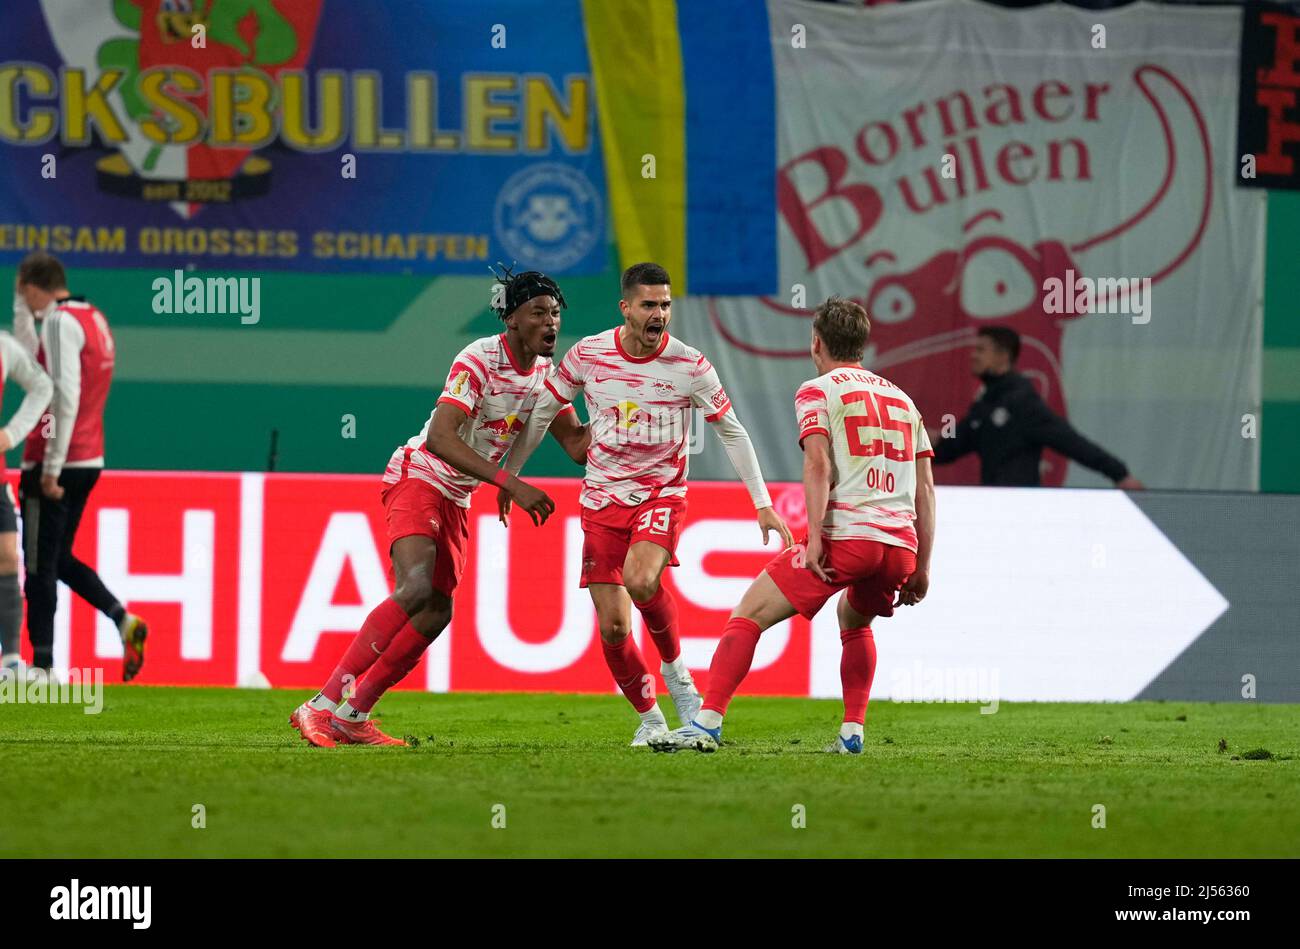 Leipzig, Germany - April 20:Fans celebrate Sheraldo Becker of Union Berlin scoring scoring their first goal during the DFB-Pokal Semi-final match between RB Leipzig against 1. FC Union Berlin at Red Bull Arena on April 20, 2022 in Leipzig, Germany. (Photo by Thor Wegner/DeFodi Images) Stock Photo